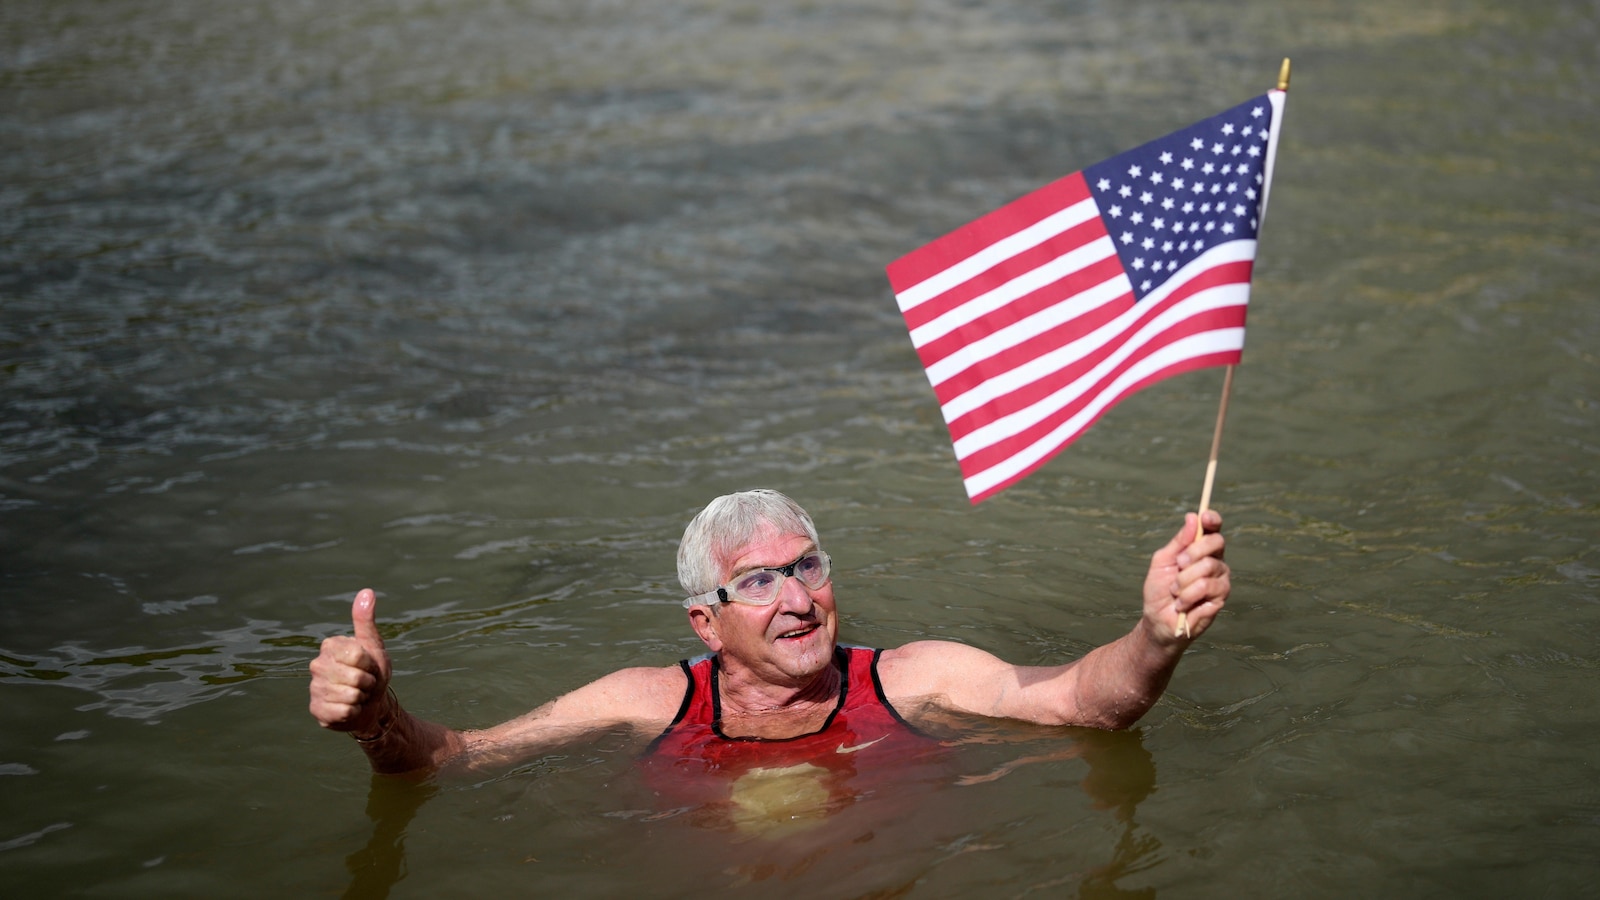 Swimmer from the United States takes a dip in the Seine River ahead of Olympics despite pollution worries